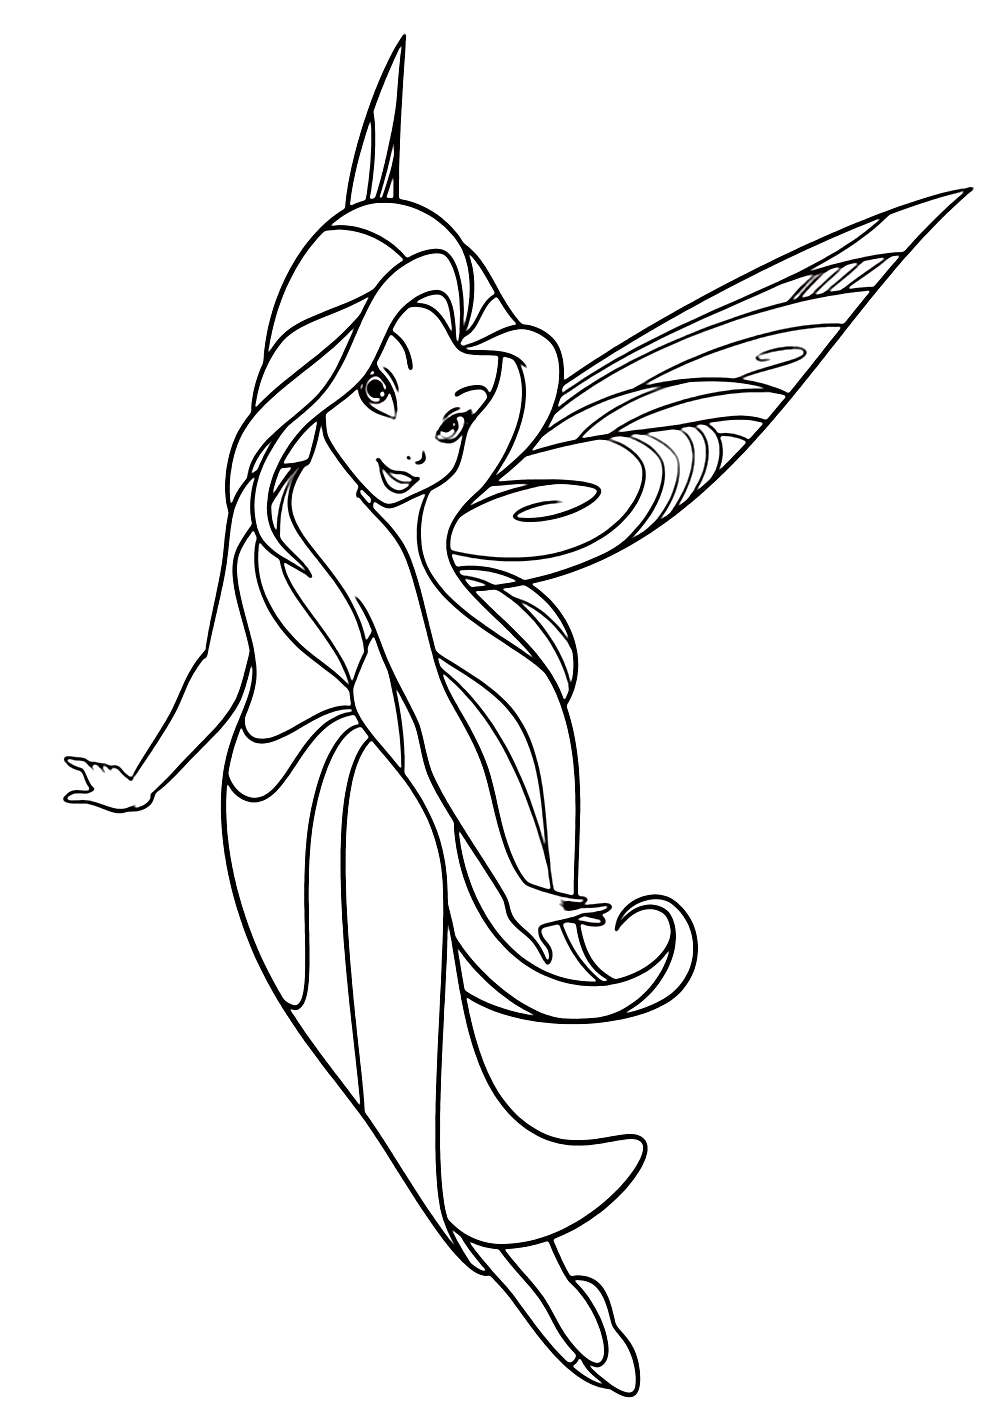 Cute & Beautiful Fairy Coloring Pages (Updated) PDF » Print Color Craft